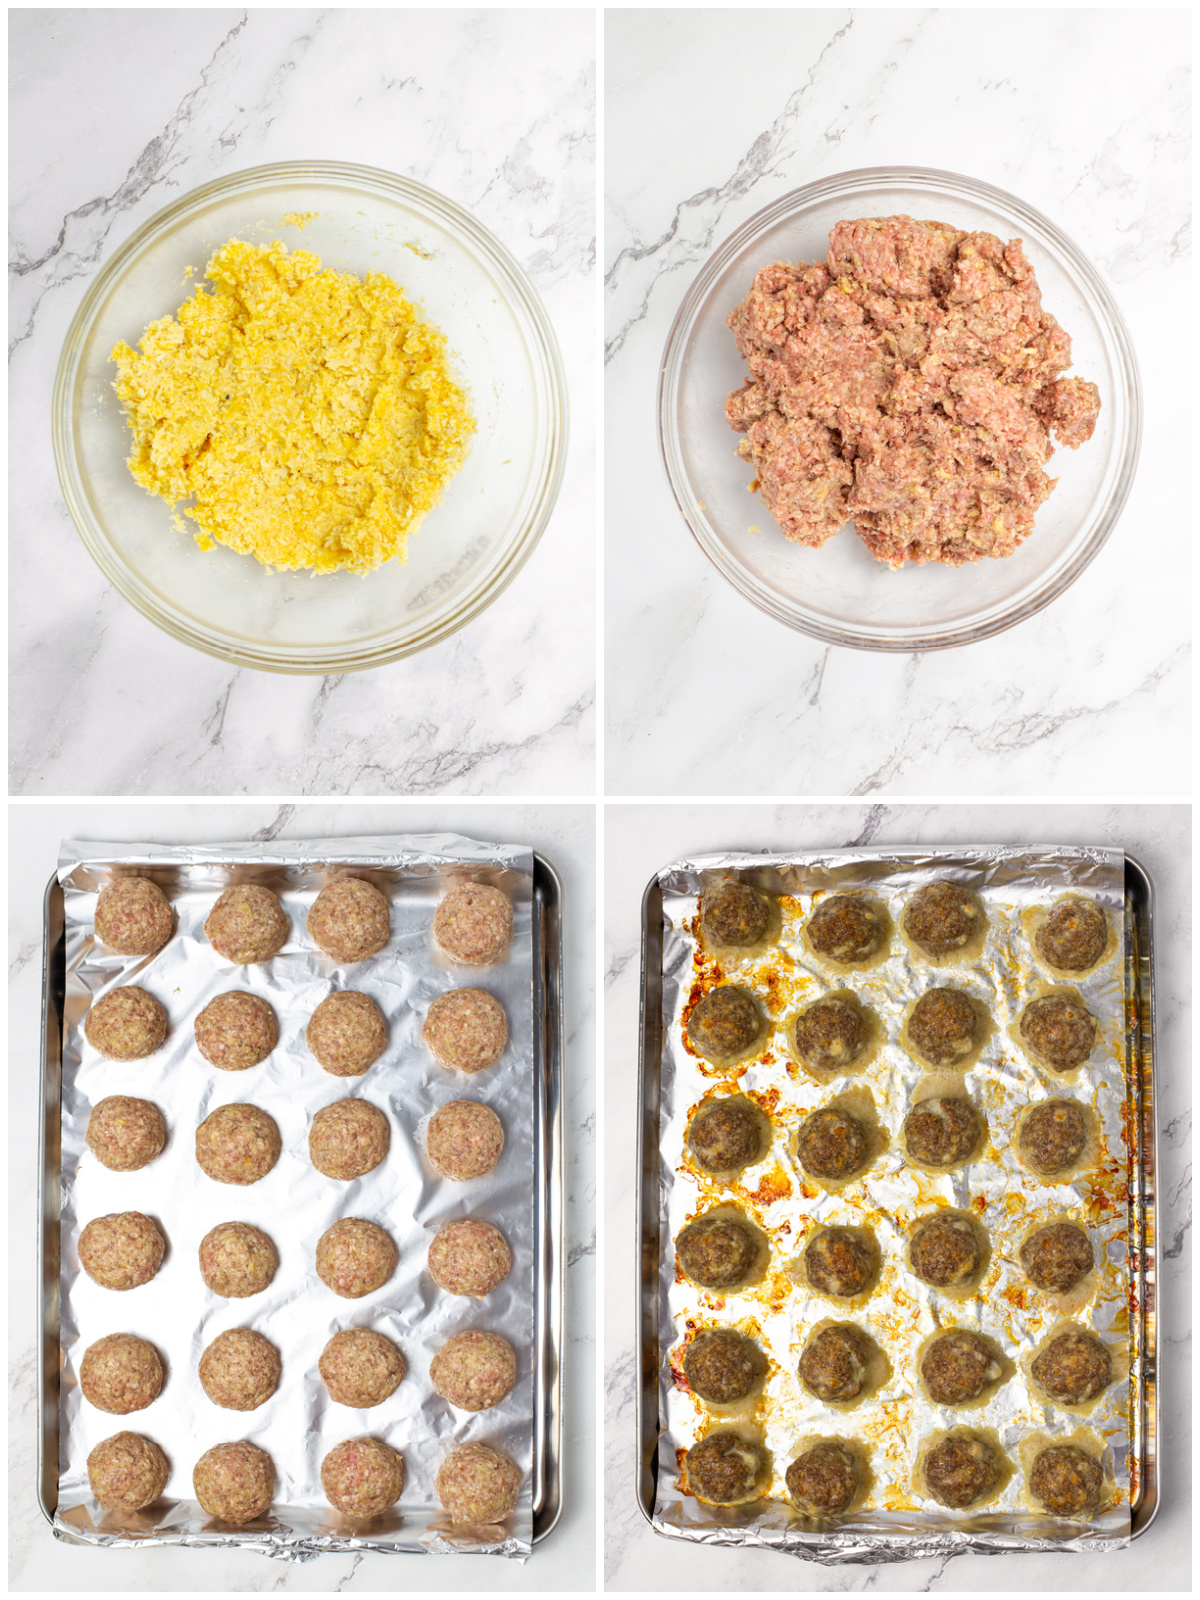 Step by step photos on how to make Homemade Meatballs